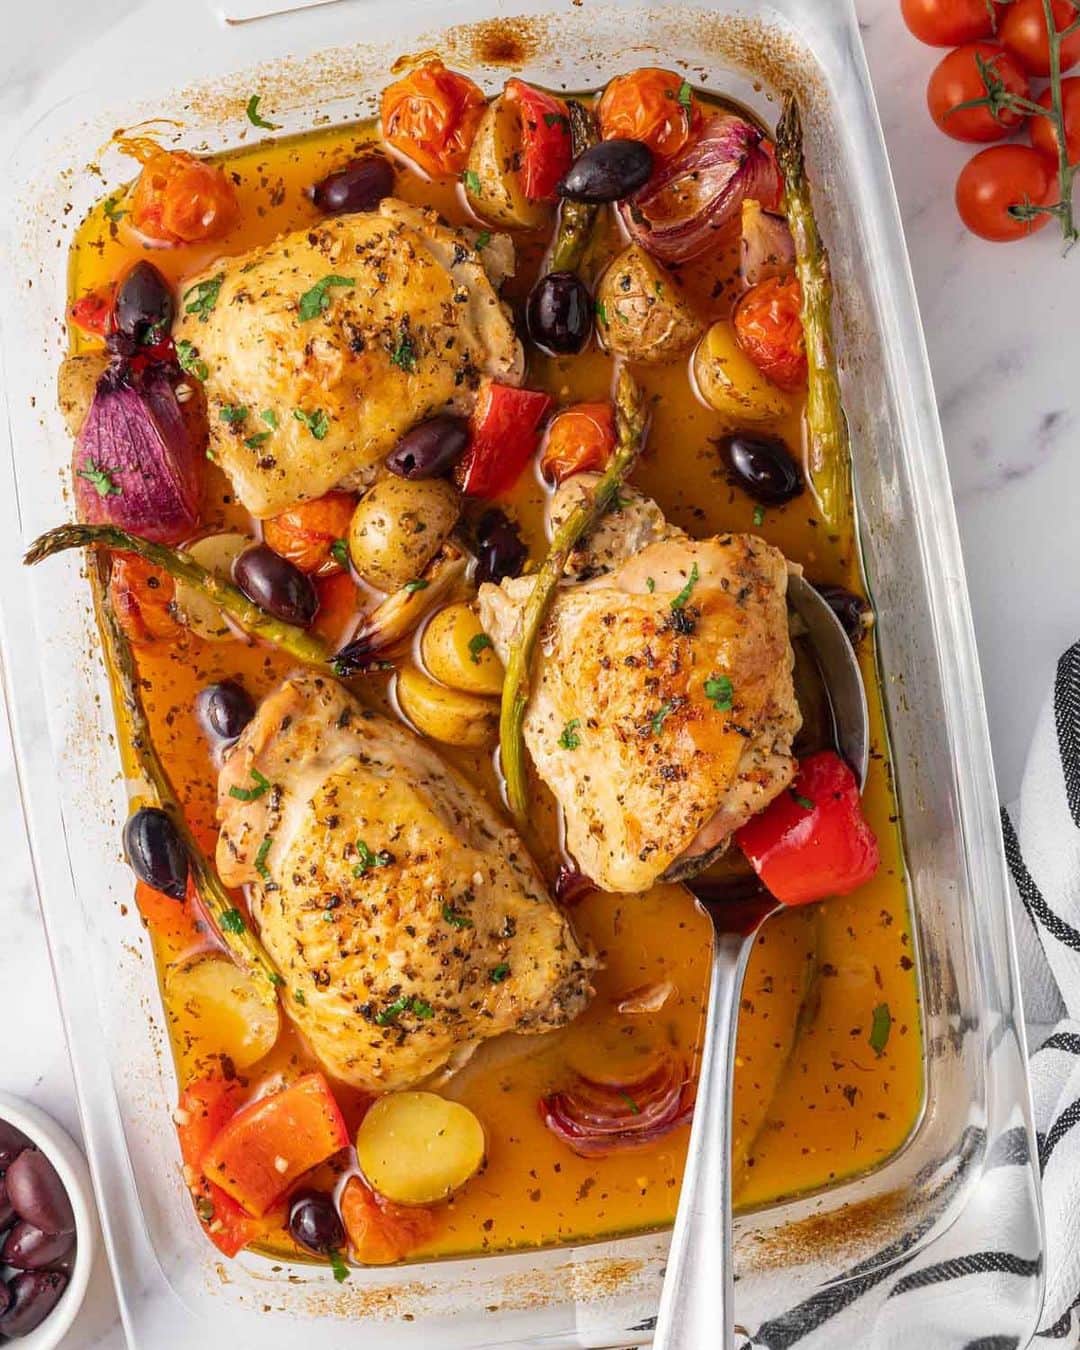 Easy Recipesのインスタグラム：「Chicken and Vegetable fans will love this simple Mediterranean Chicken Bake. Pair marinated chicken with olives, potatoes, onions, bell peppers, asparagus and tomatoes for a simple yet flavorful one-dish dinner perfect for busy weeknights.  Full recipe link in my bio @cookinwithmima  https://www.cookinwithmima.com/mediterranean-chicken-bake/」